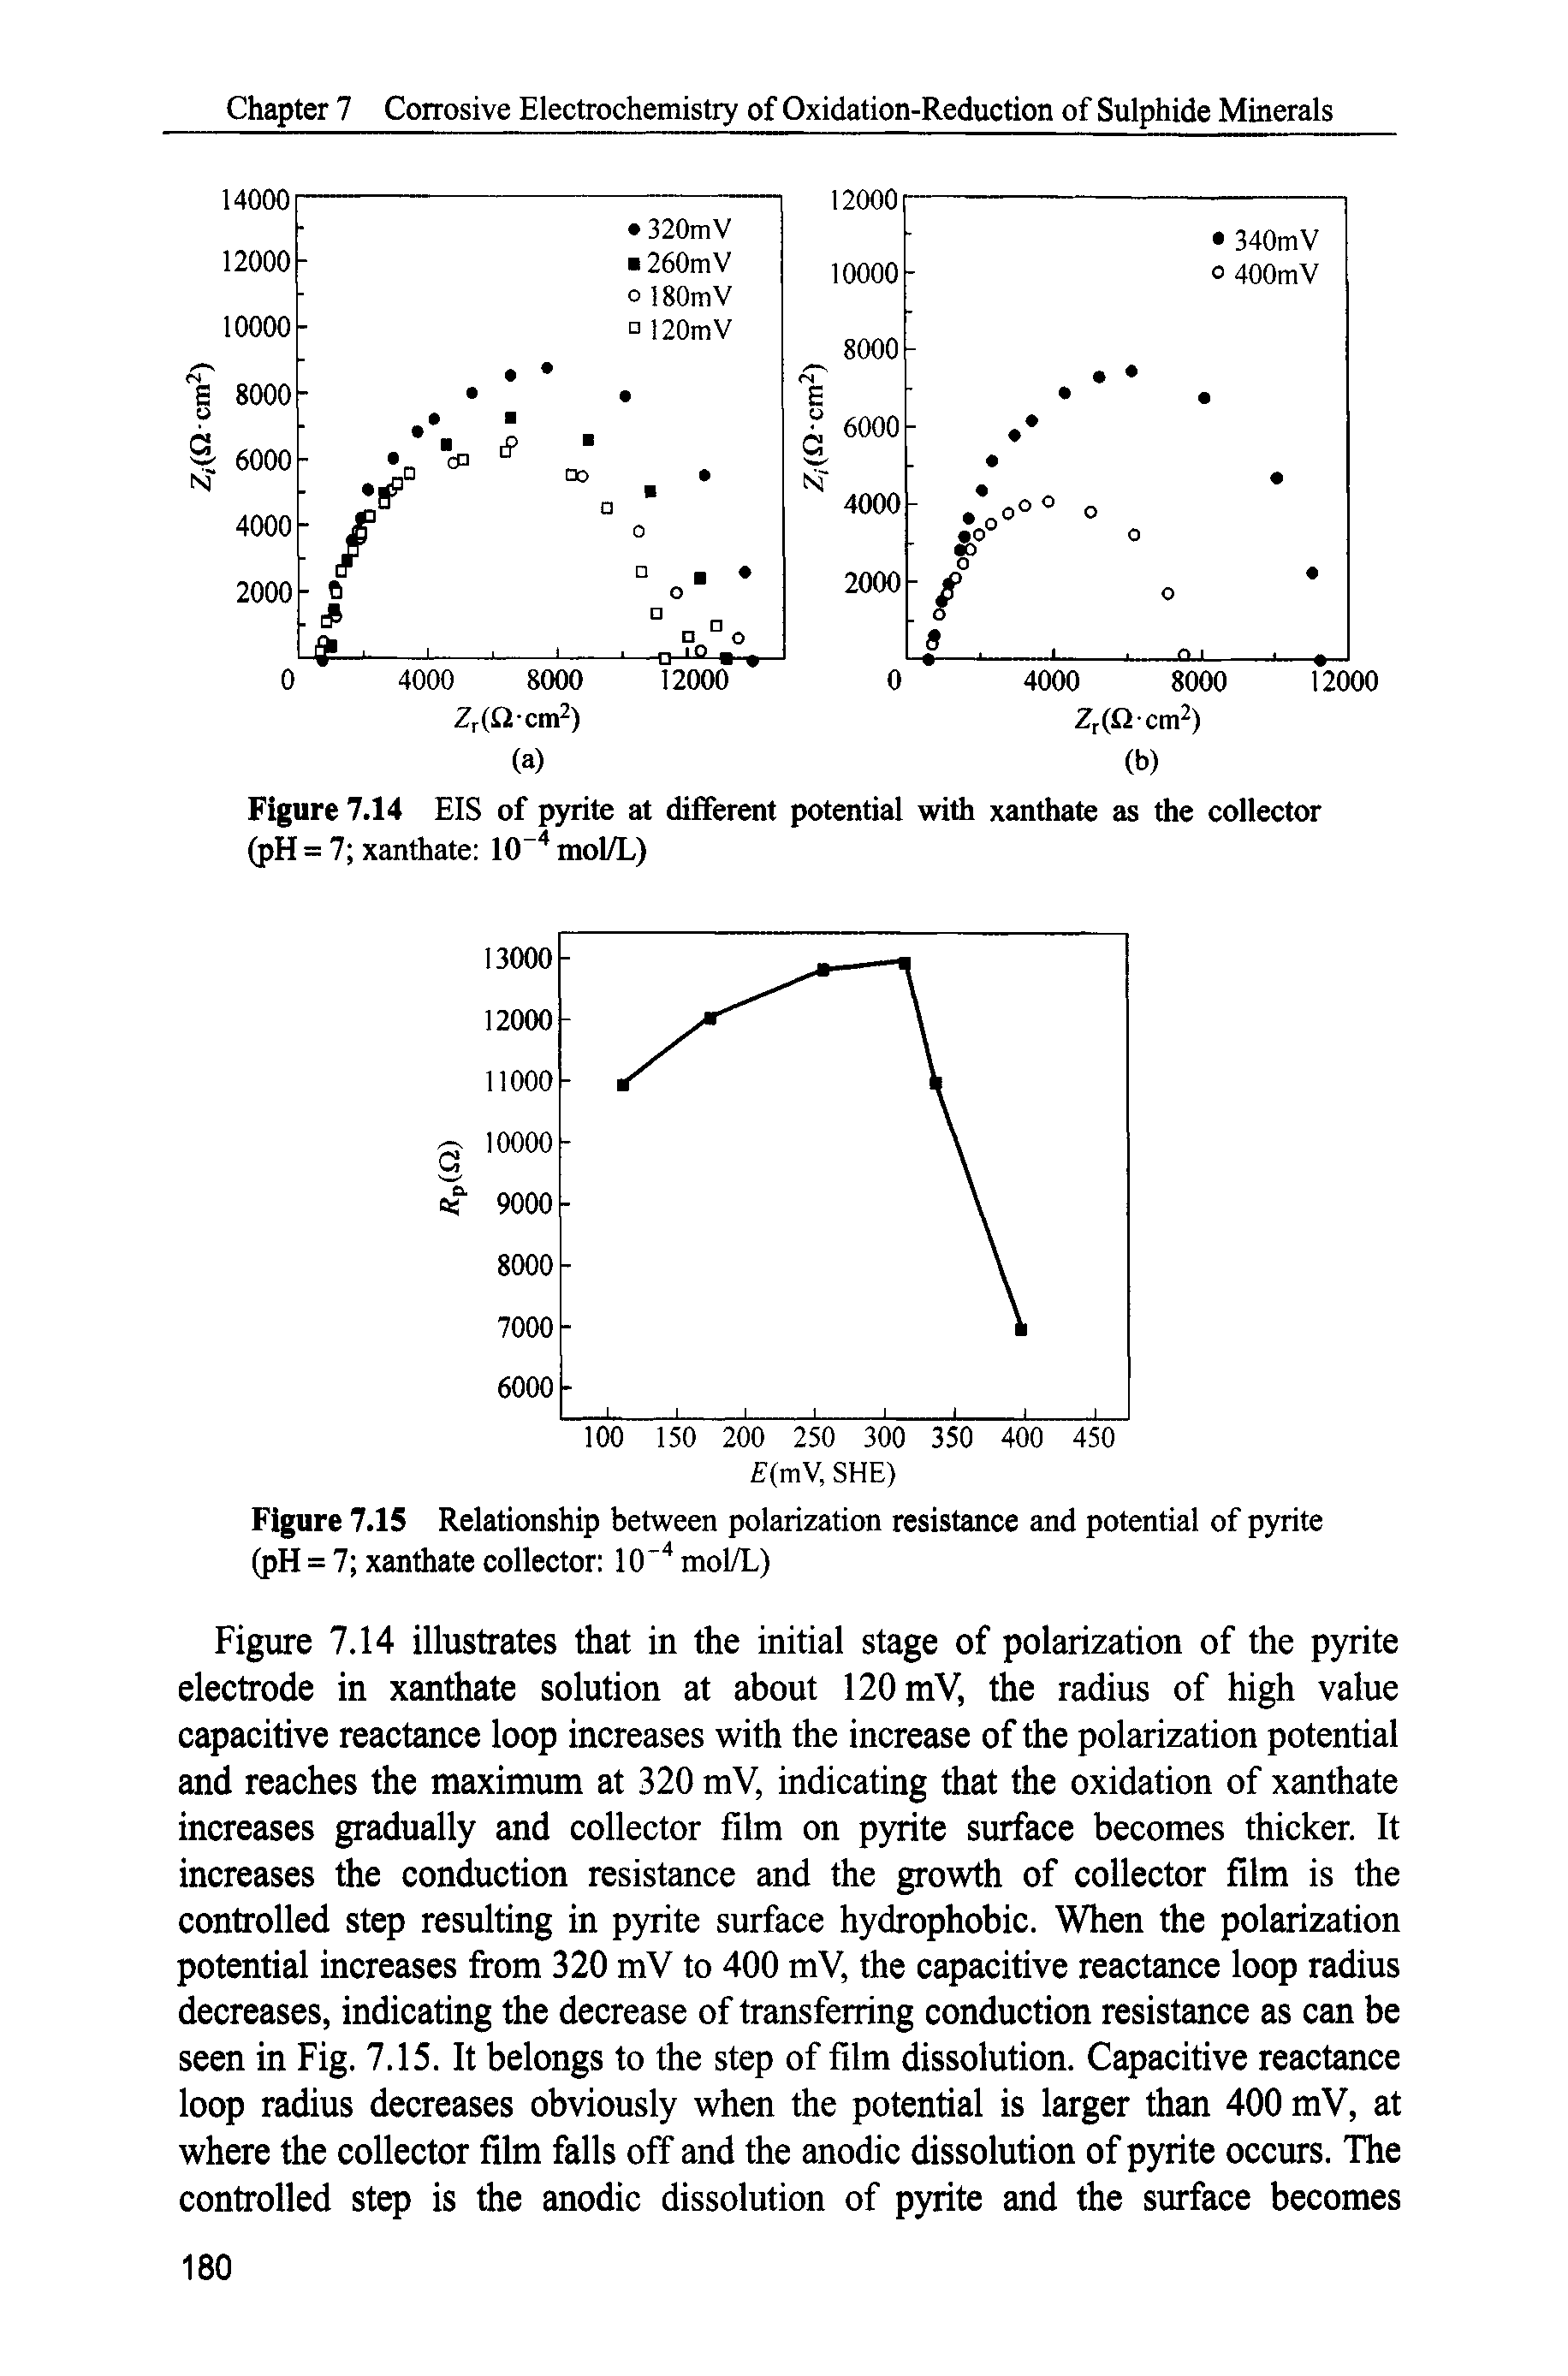 Figure 7.14 illustrates that in the initial stage of polarization of the pyrite electrode in xanthate solution at about 120 mV, the radius of high value capacitive reactance loop increases with the increase of the polarization potential and reaches the maximum at 320 mV, indicating that the oxidation of xanthate increases gradually and collector film on pyrite surface becomes thicker. It increases the conduction resistance and the growth of collector film is the controlled step resulting in pyrite surface hydrophobic. When the polarization potential increases from 320 mV to 400 mV, the capacitive reactance loop radius decreases, indicating the decrease of transferring conduction resistance as can be seen in Fig. 7.15. It belongs to the step of film dissolution. Capacitive reactance loop radius decreases obviously when the potential is larger than 400 mV, at where the collector film falls off and the anodic dissolution of pyrite occurs. The controlled step is the anodic dissolution of pyrite and the surface becomes...